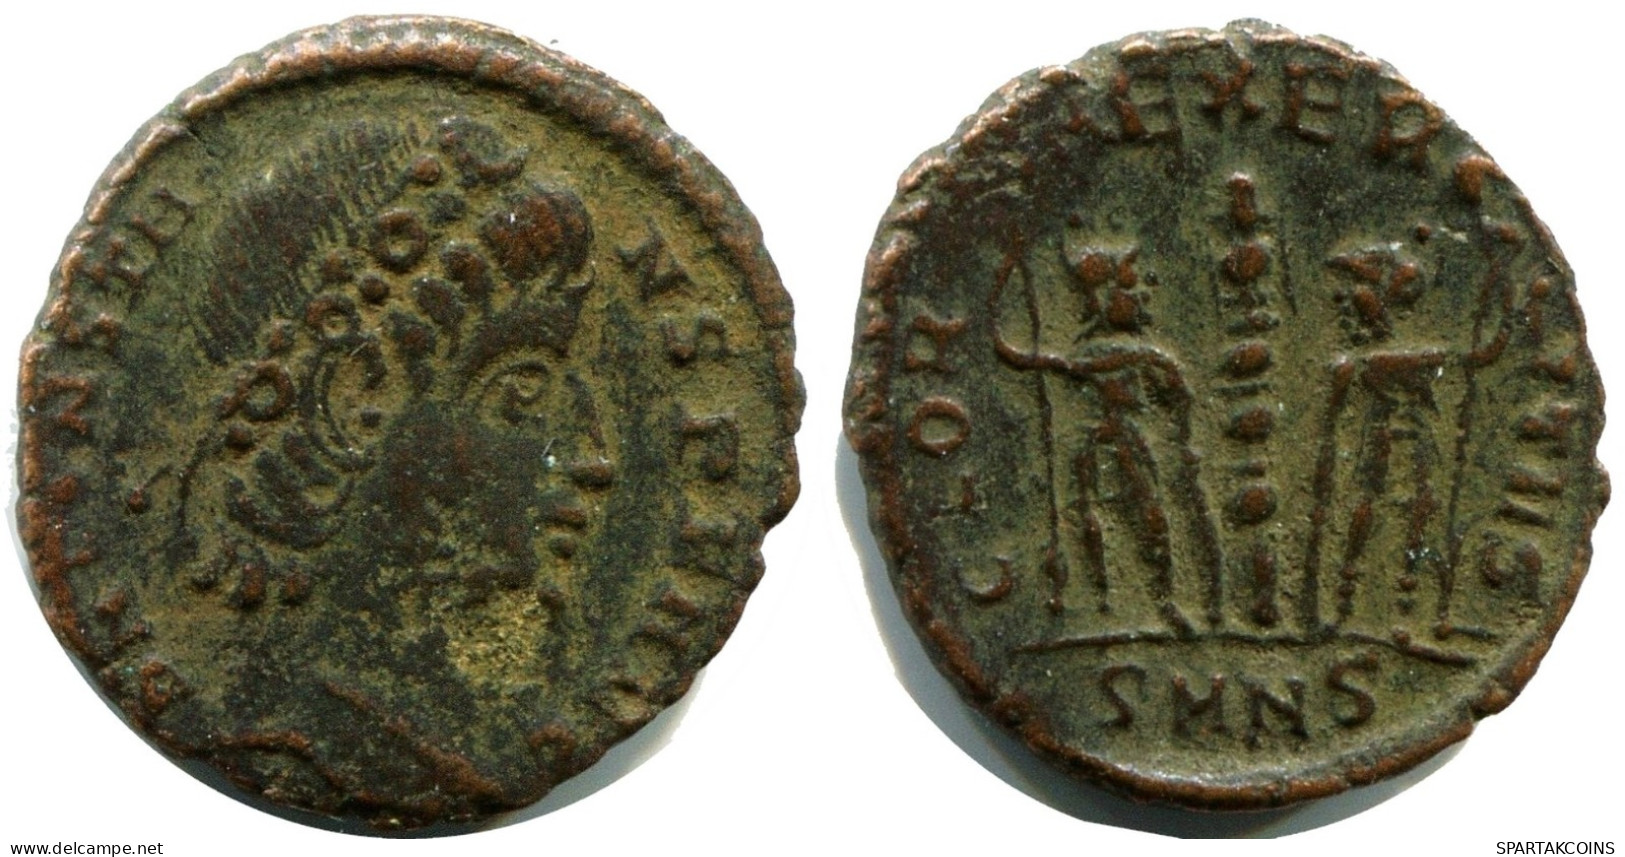 CONSTANS MINTED IN NICOMEDIA FROM THE ROYAL ONTARIO MUSEUM #ANC11775.14.E.A - Der Christlischen Kaiser (307 / 363)